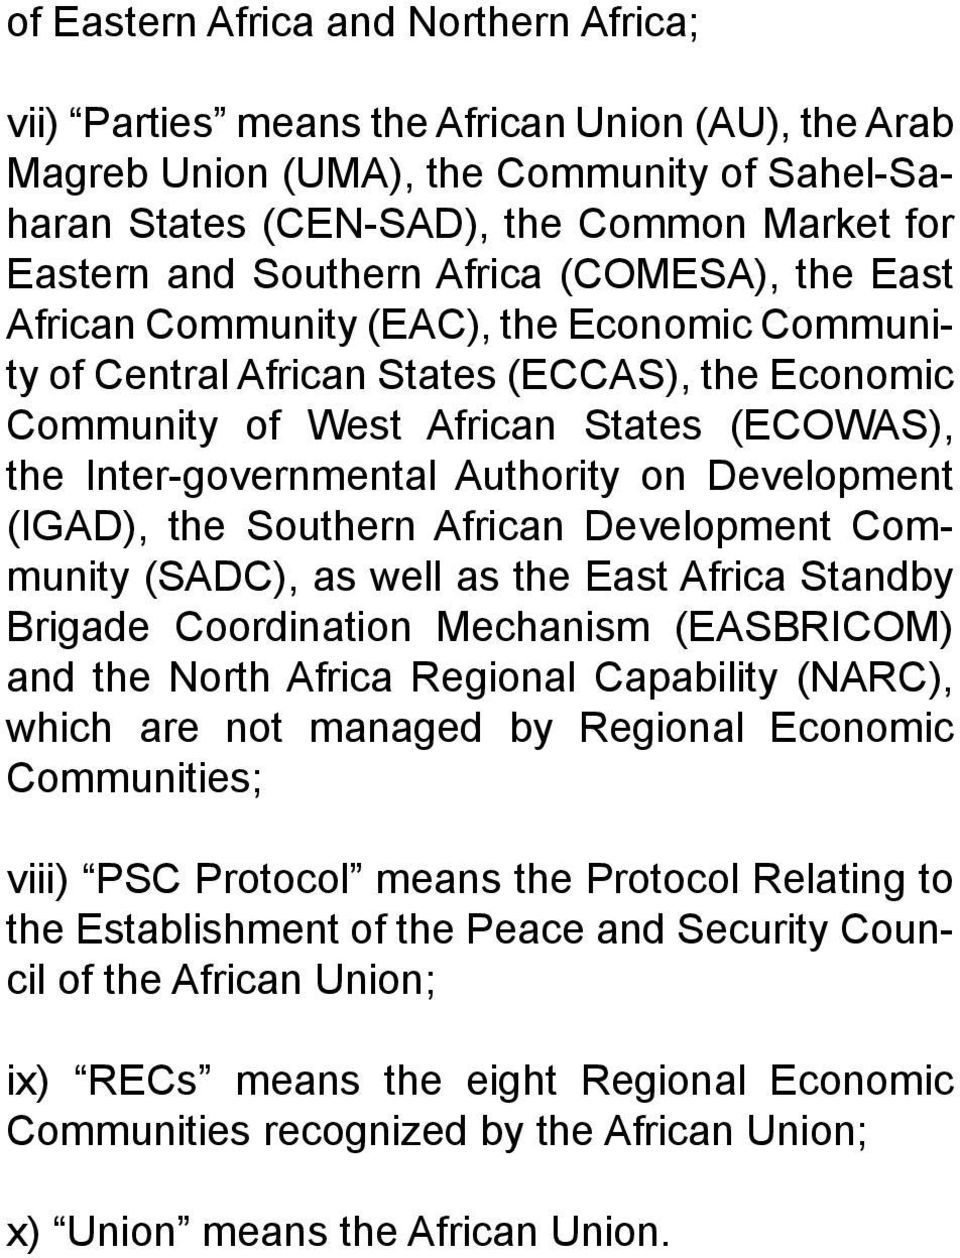 Authority on Development (IGAD), the Southern African Development Community (SADC), as well as the East Africa Standby Brigade Coordination Mechanism (EASBRICOM) and the North Africa Regional